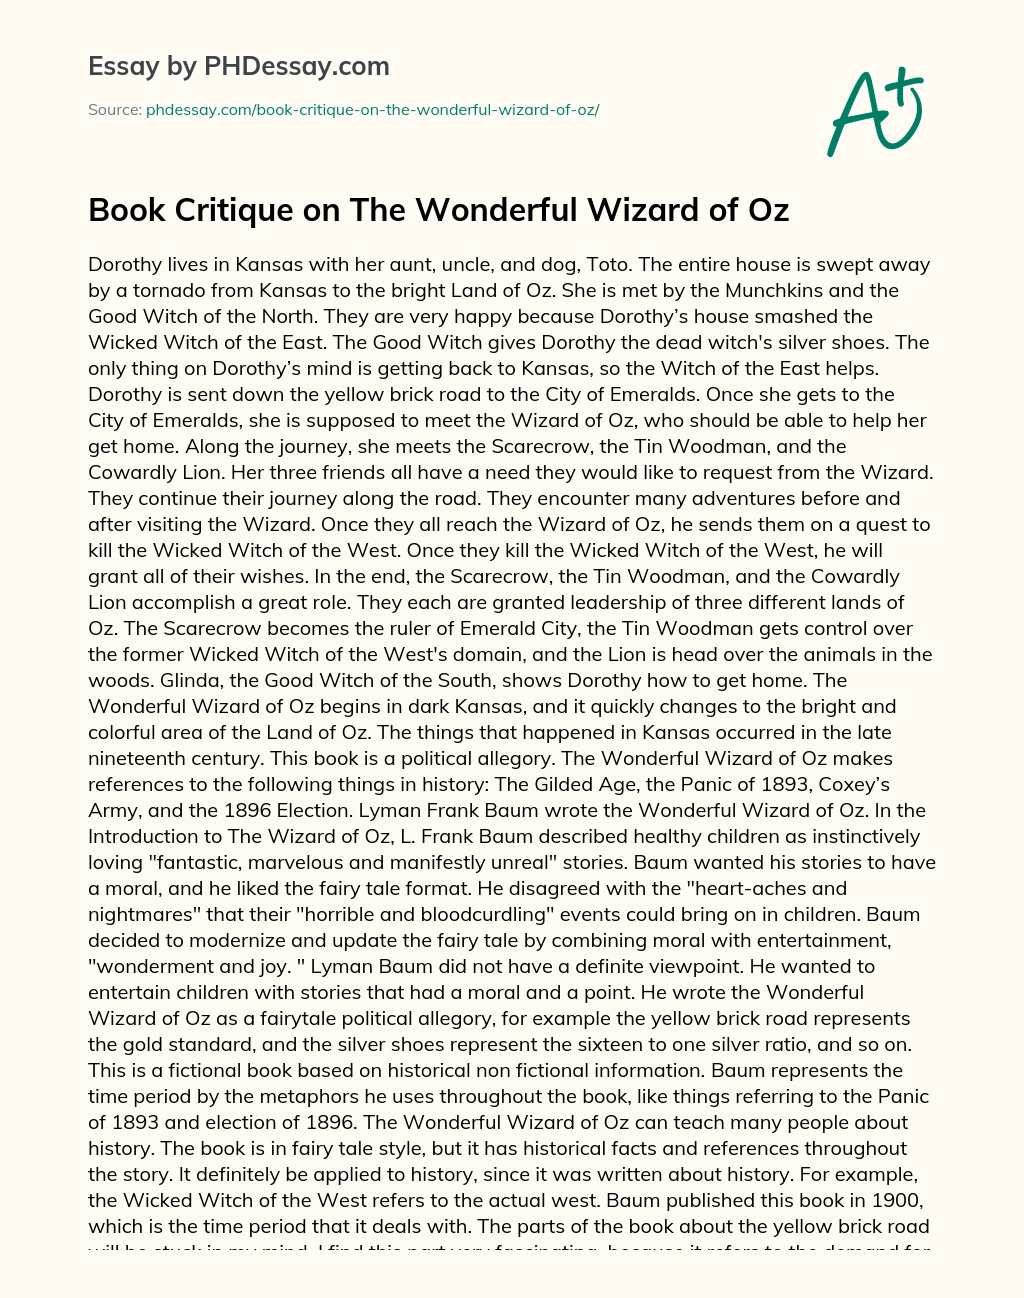 Book Critique on The Wonderful Wizard of Oz essay